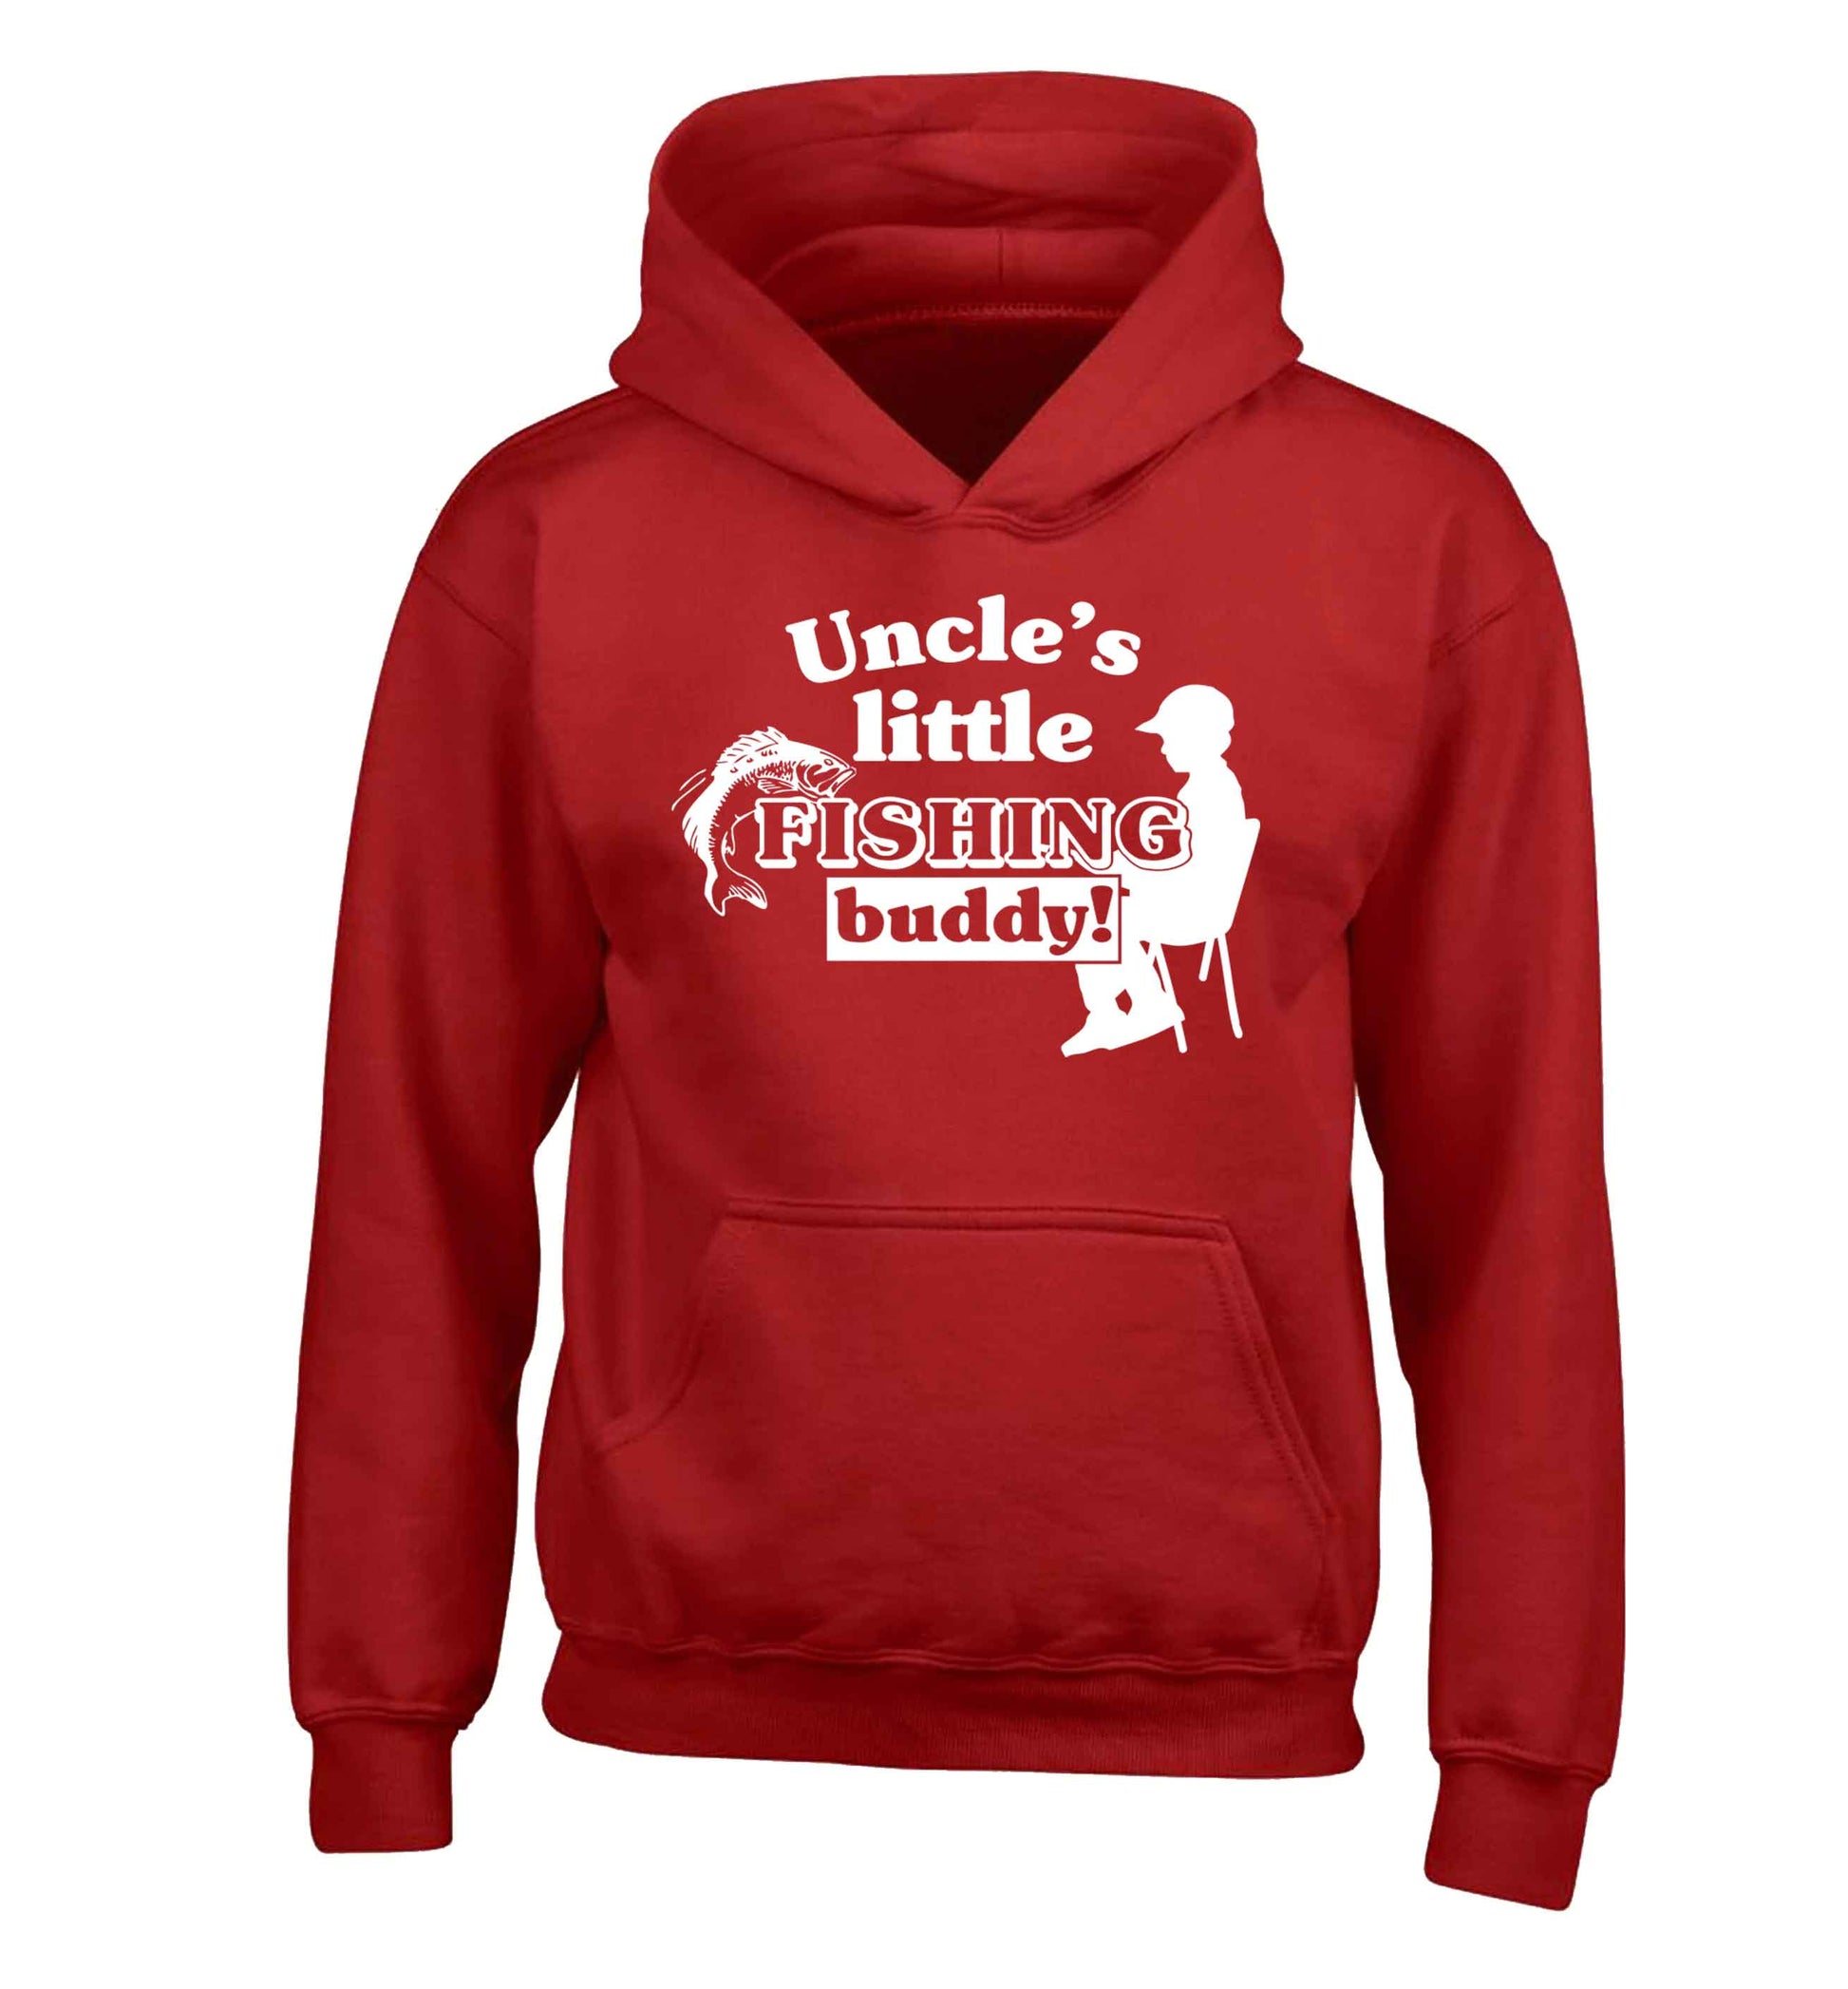 Uncle's little fishing buddy children's red hoodie 12-13 Years